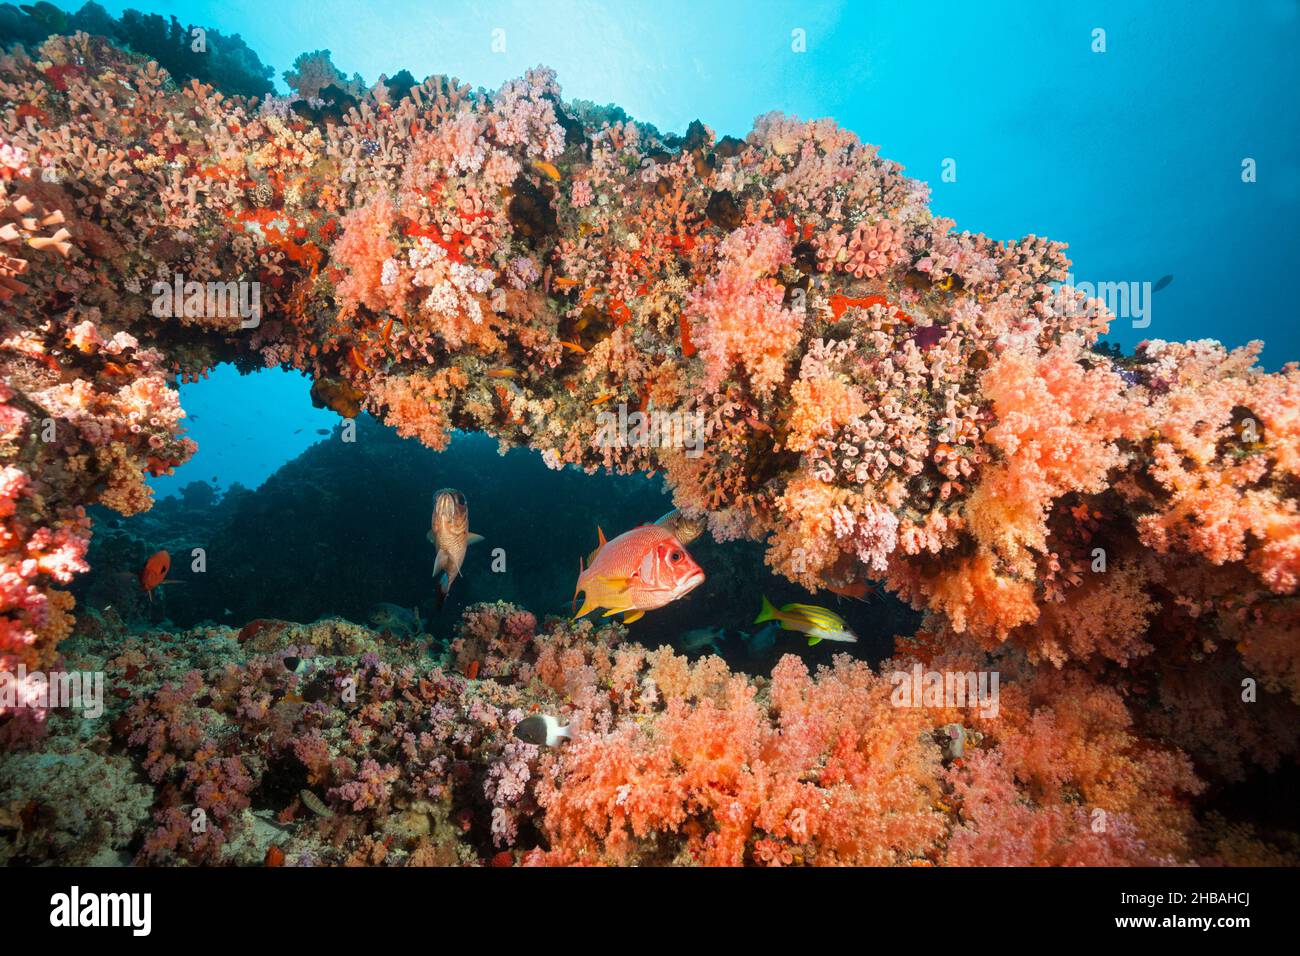 Colored Coral Reef, North Male Atoll, Indian Ocean, Maldives Stock Photo